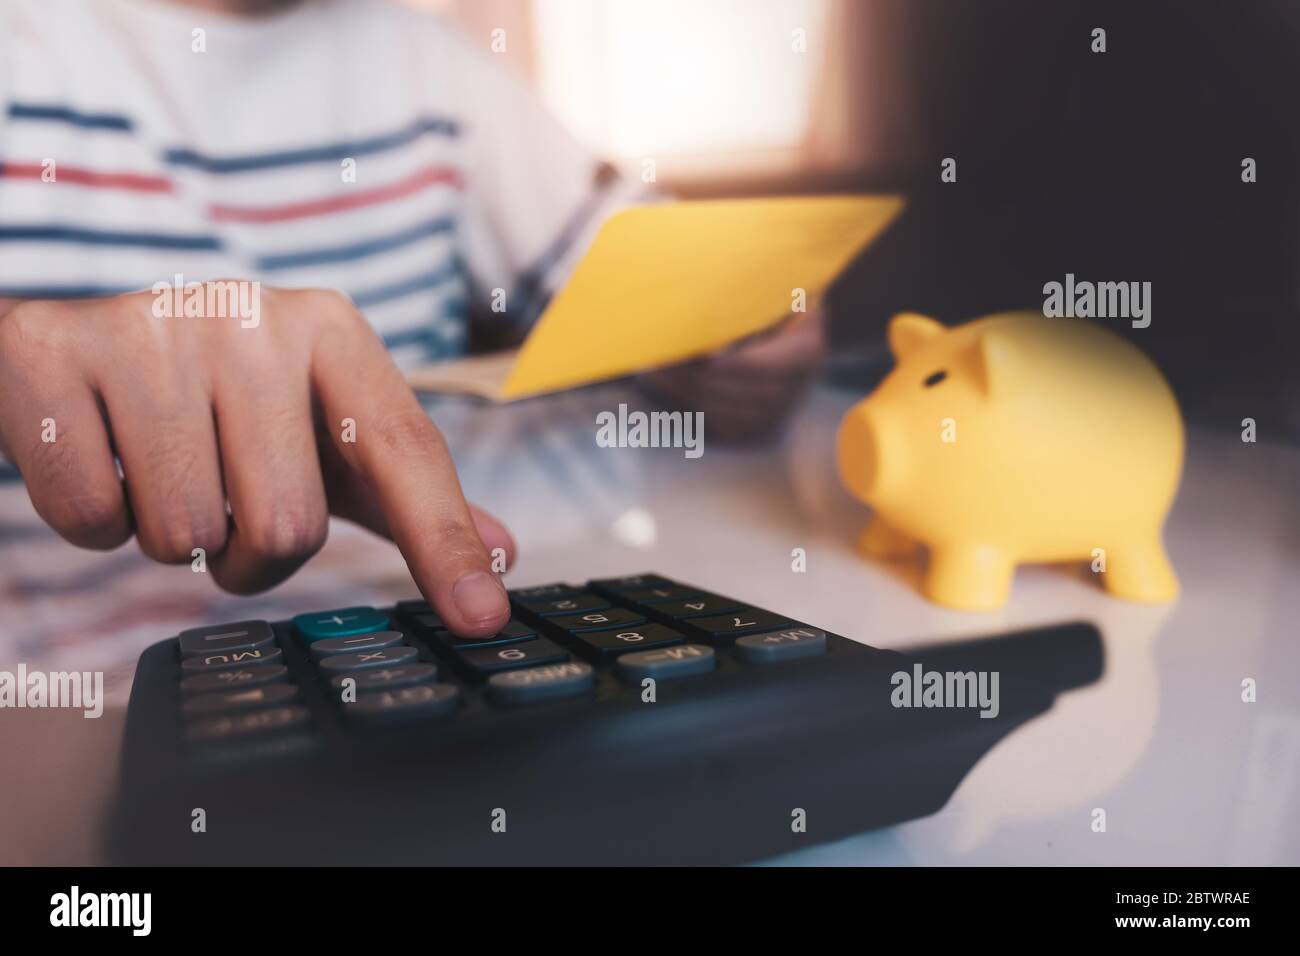 Business hands holding saving account passbook with calculator, account and saving Stock Photo